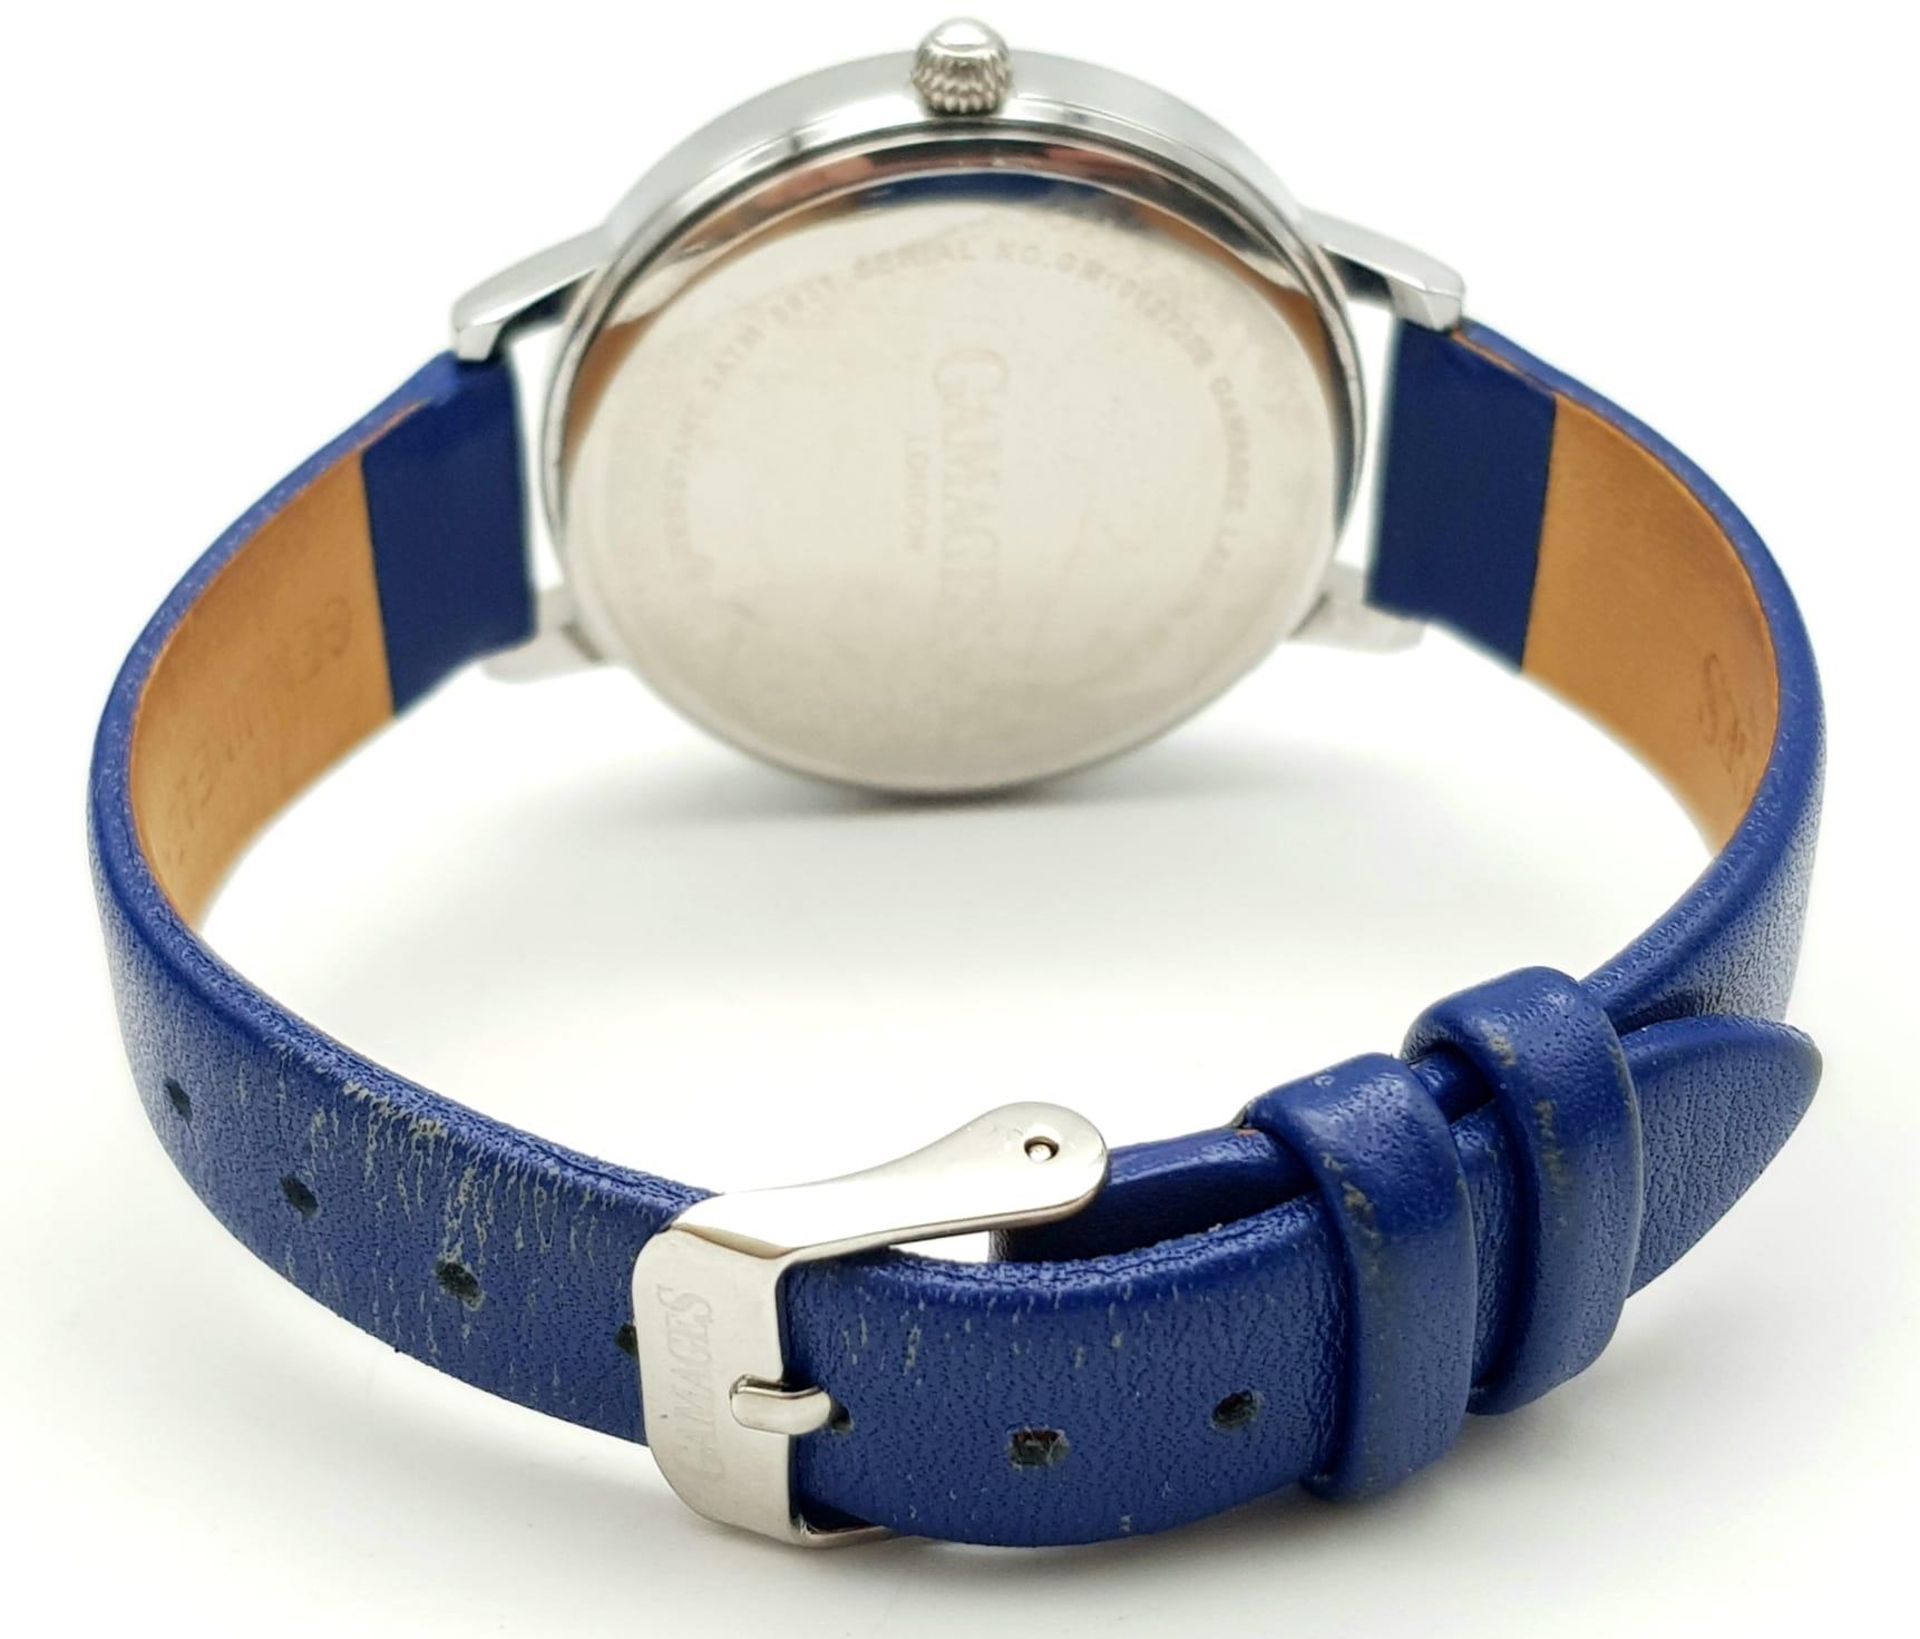 A Gamages of London Quartz Ladies Watch. Blue leather strap. Stainless steel case - 37mm. Ice blue - Image 4 of 6